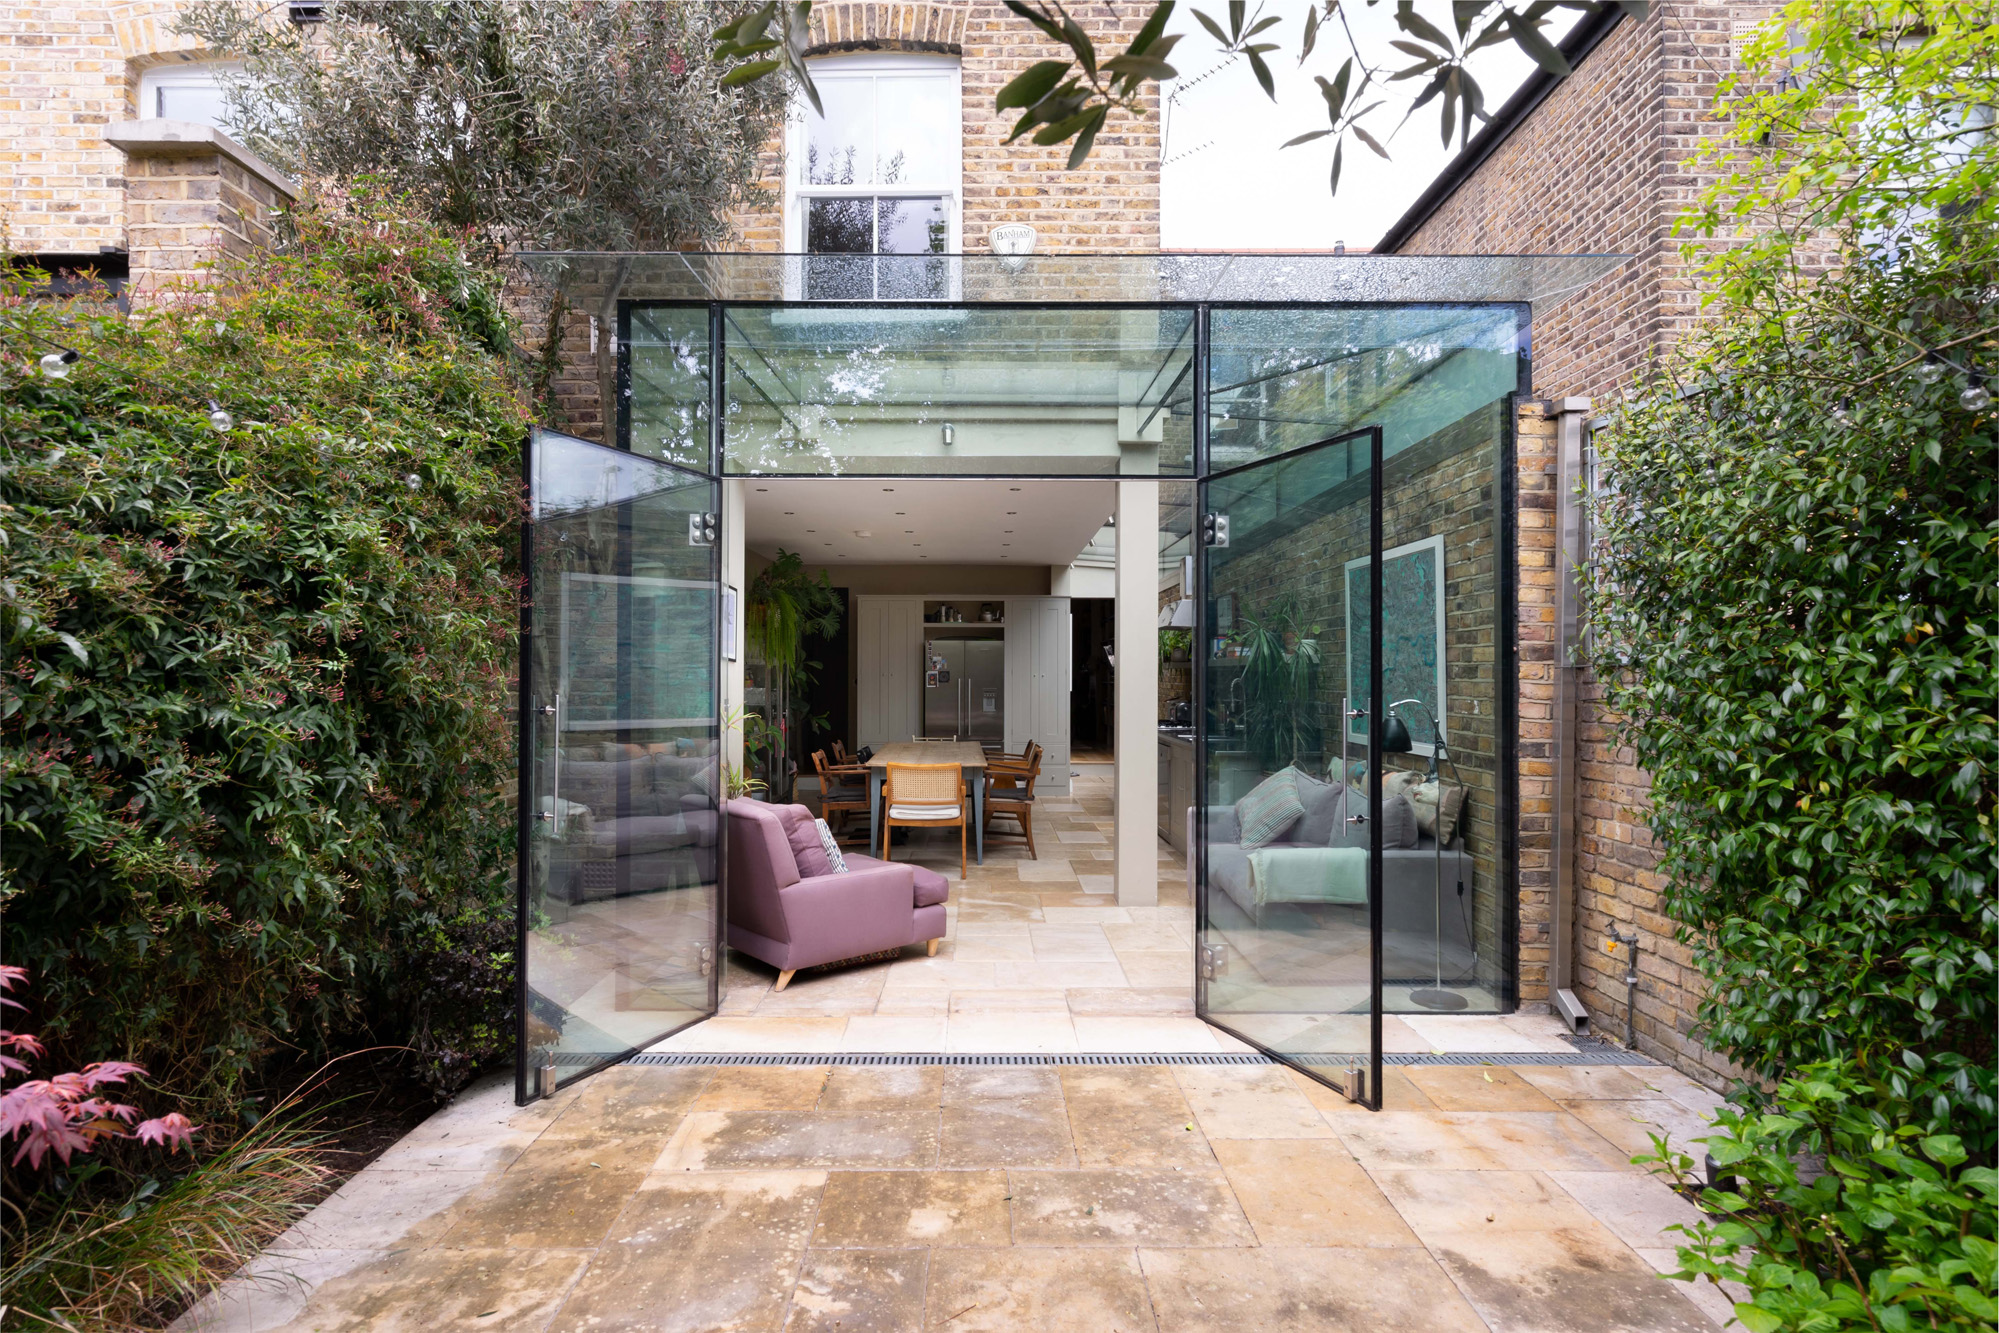 For Sale: Oxford Gardens NW10 rear extension with glass box